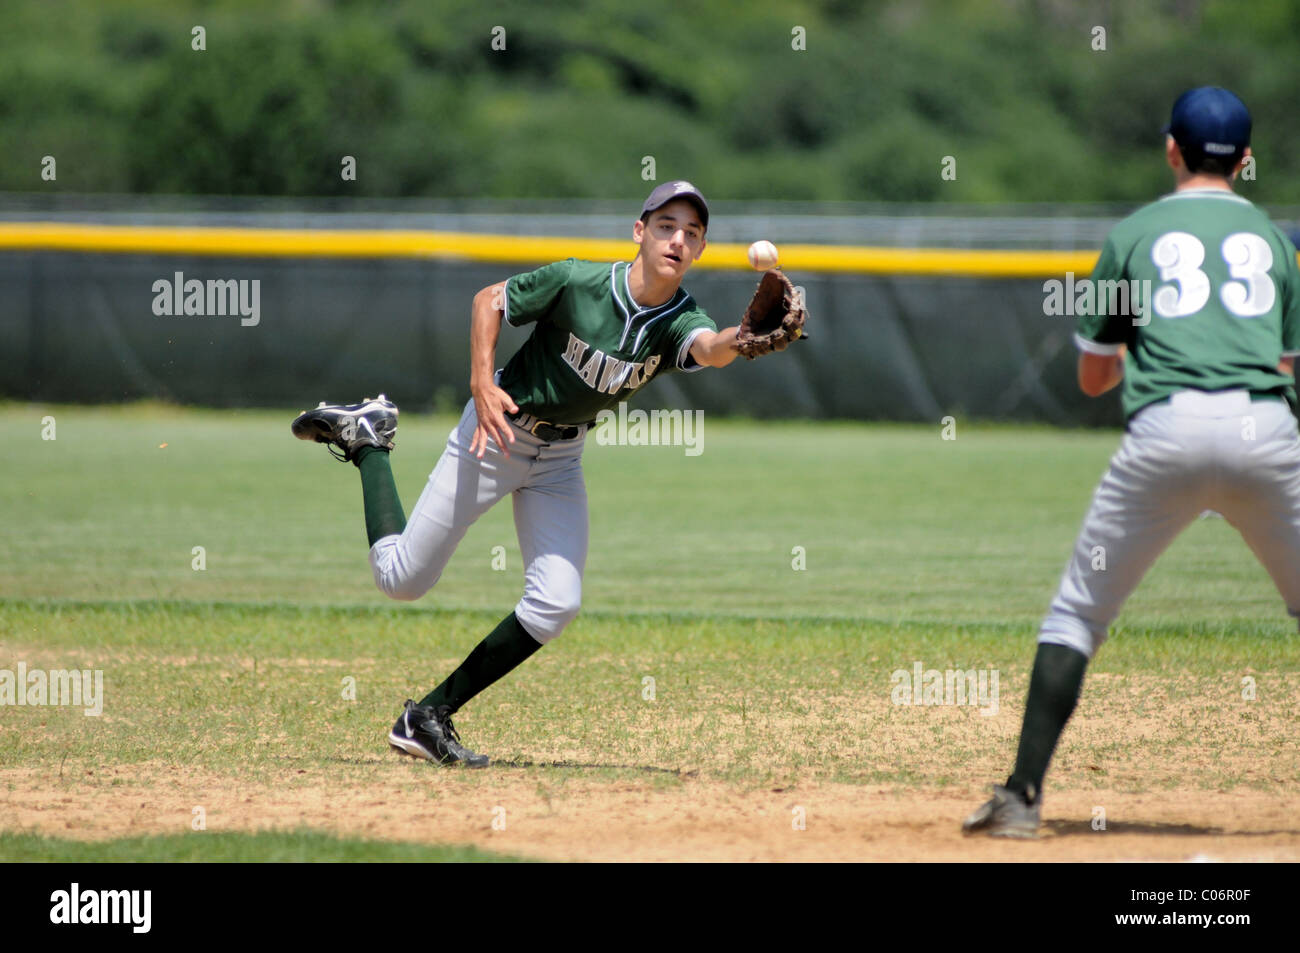 second baseman uses a glove originated shovel pass to retire a runner at first base during a high school baseball game. USA. Stock Photo